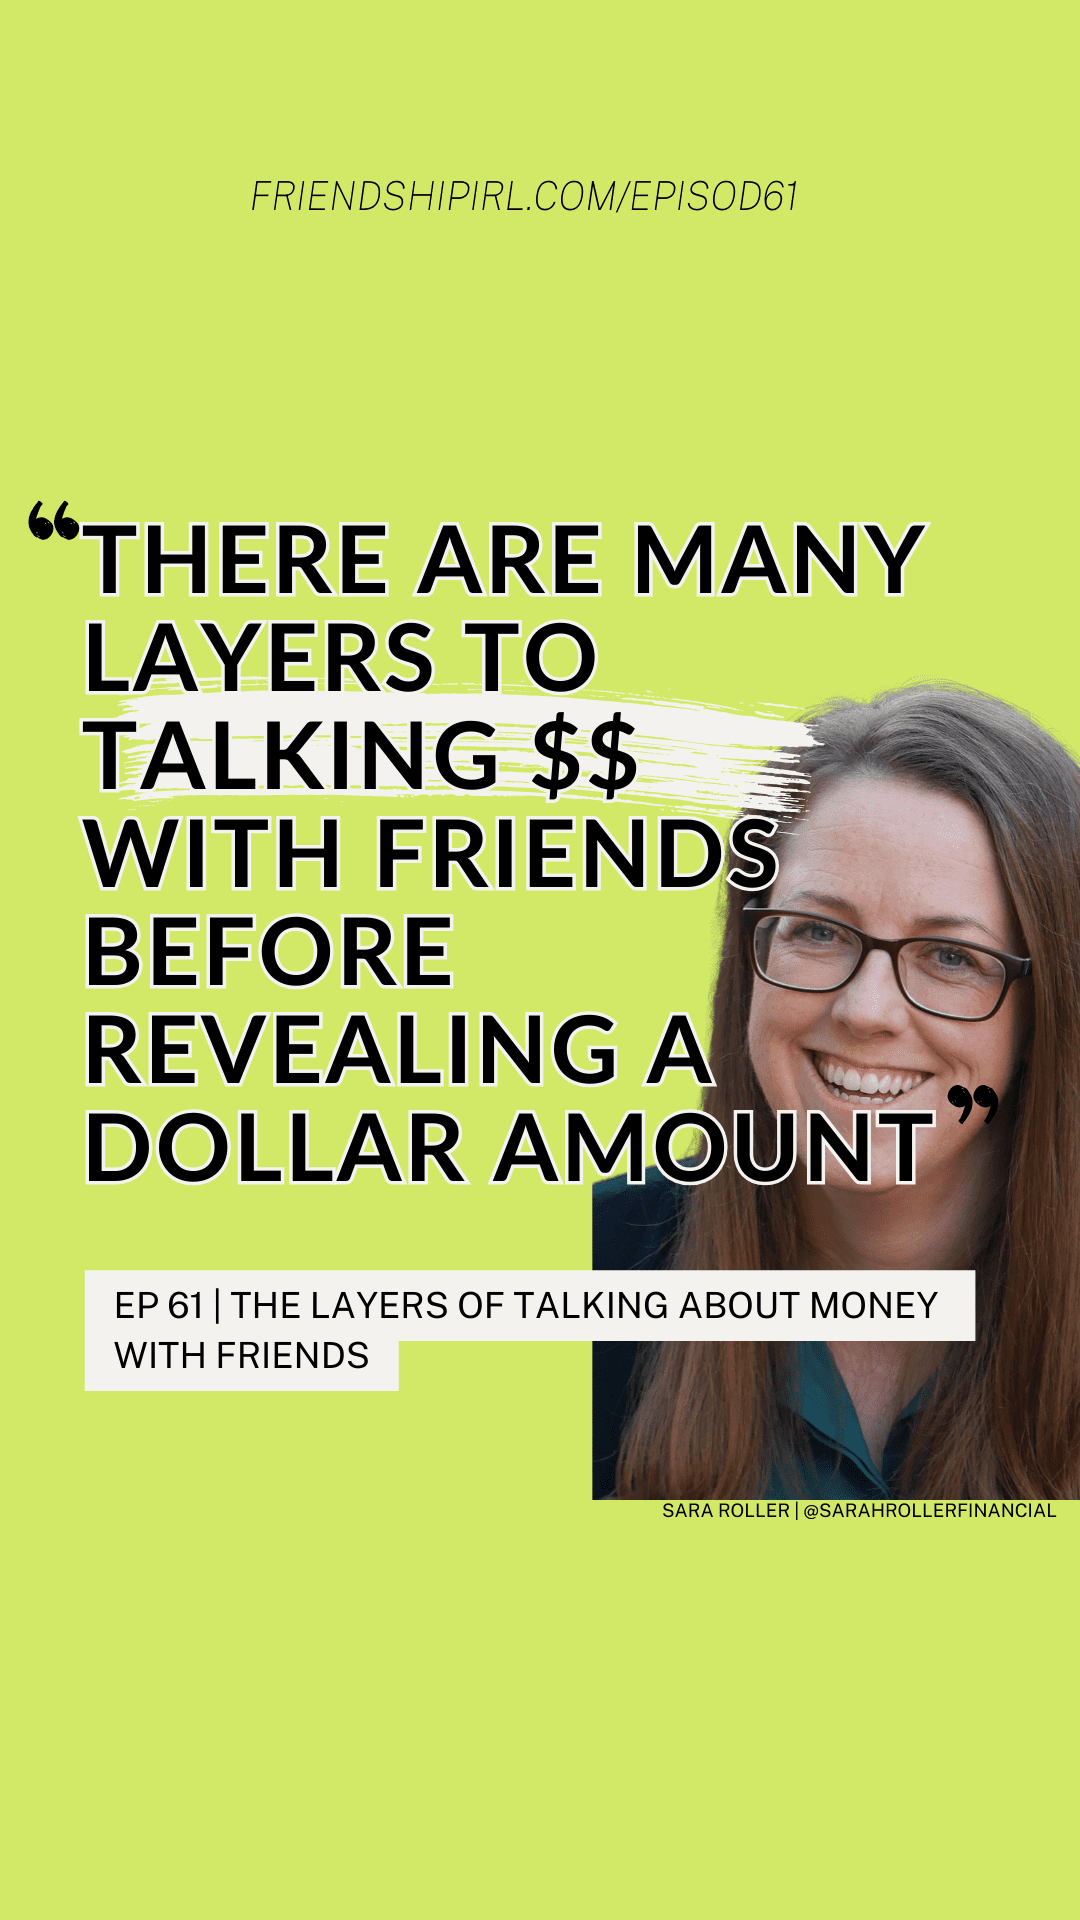 Friendship IRL Podcast - Episode 61 - The Layers of Talking About Money With Friends With Financial Coach Sarah Roller